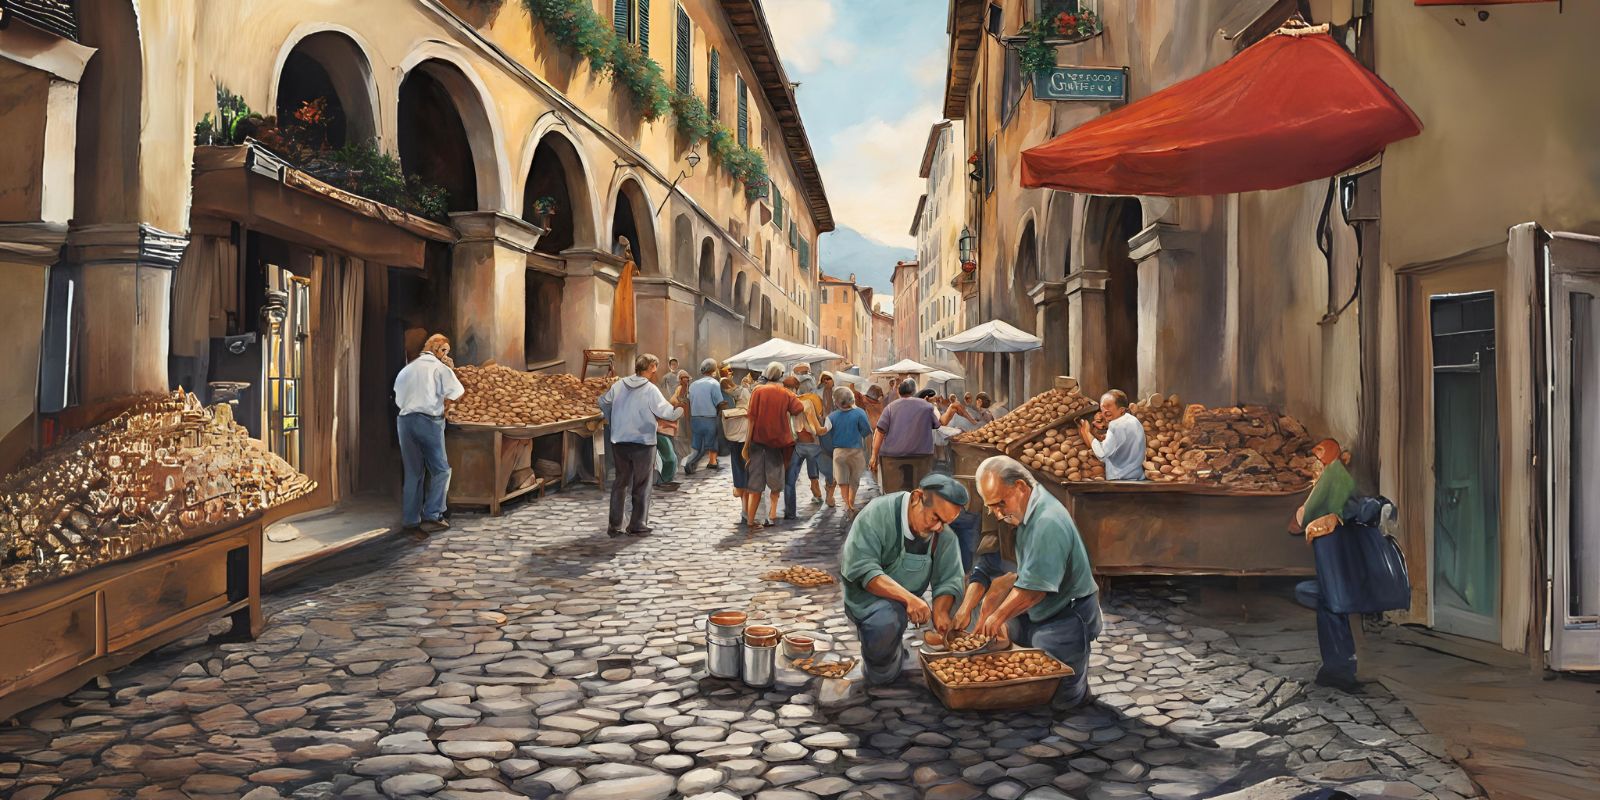 Certainly! Here's a short prompt to generate an image: "Amidst a bustling Italian marketplace, a street artist creates a vibrant masterpiece on a worn cobblestone street, surrounded by curious onlookers and the aroma of freshly brewed espresso."